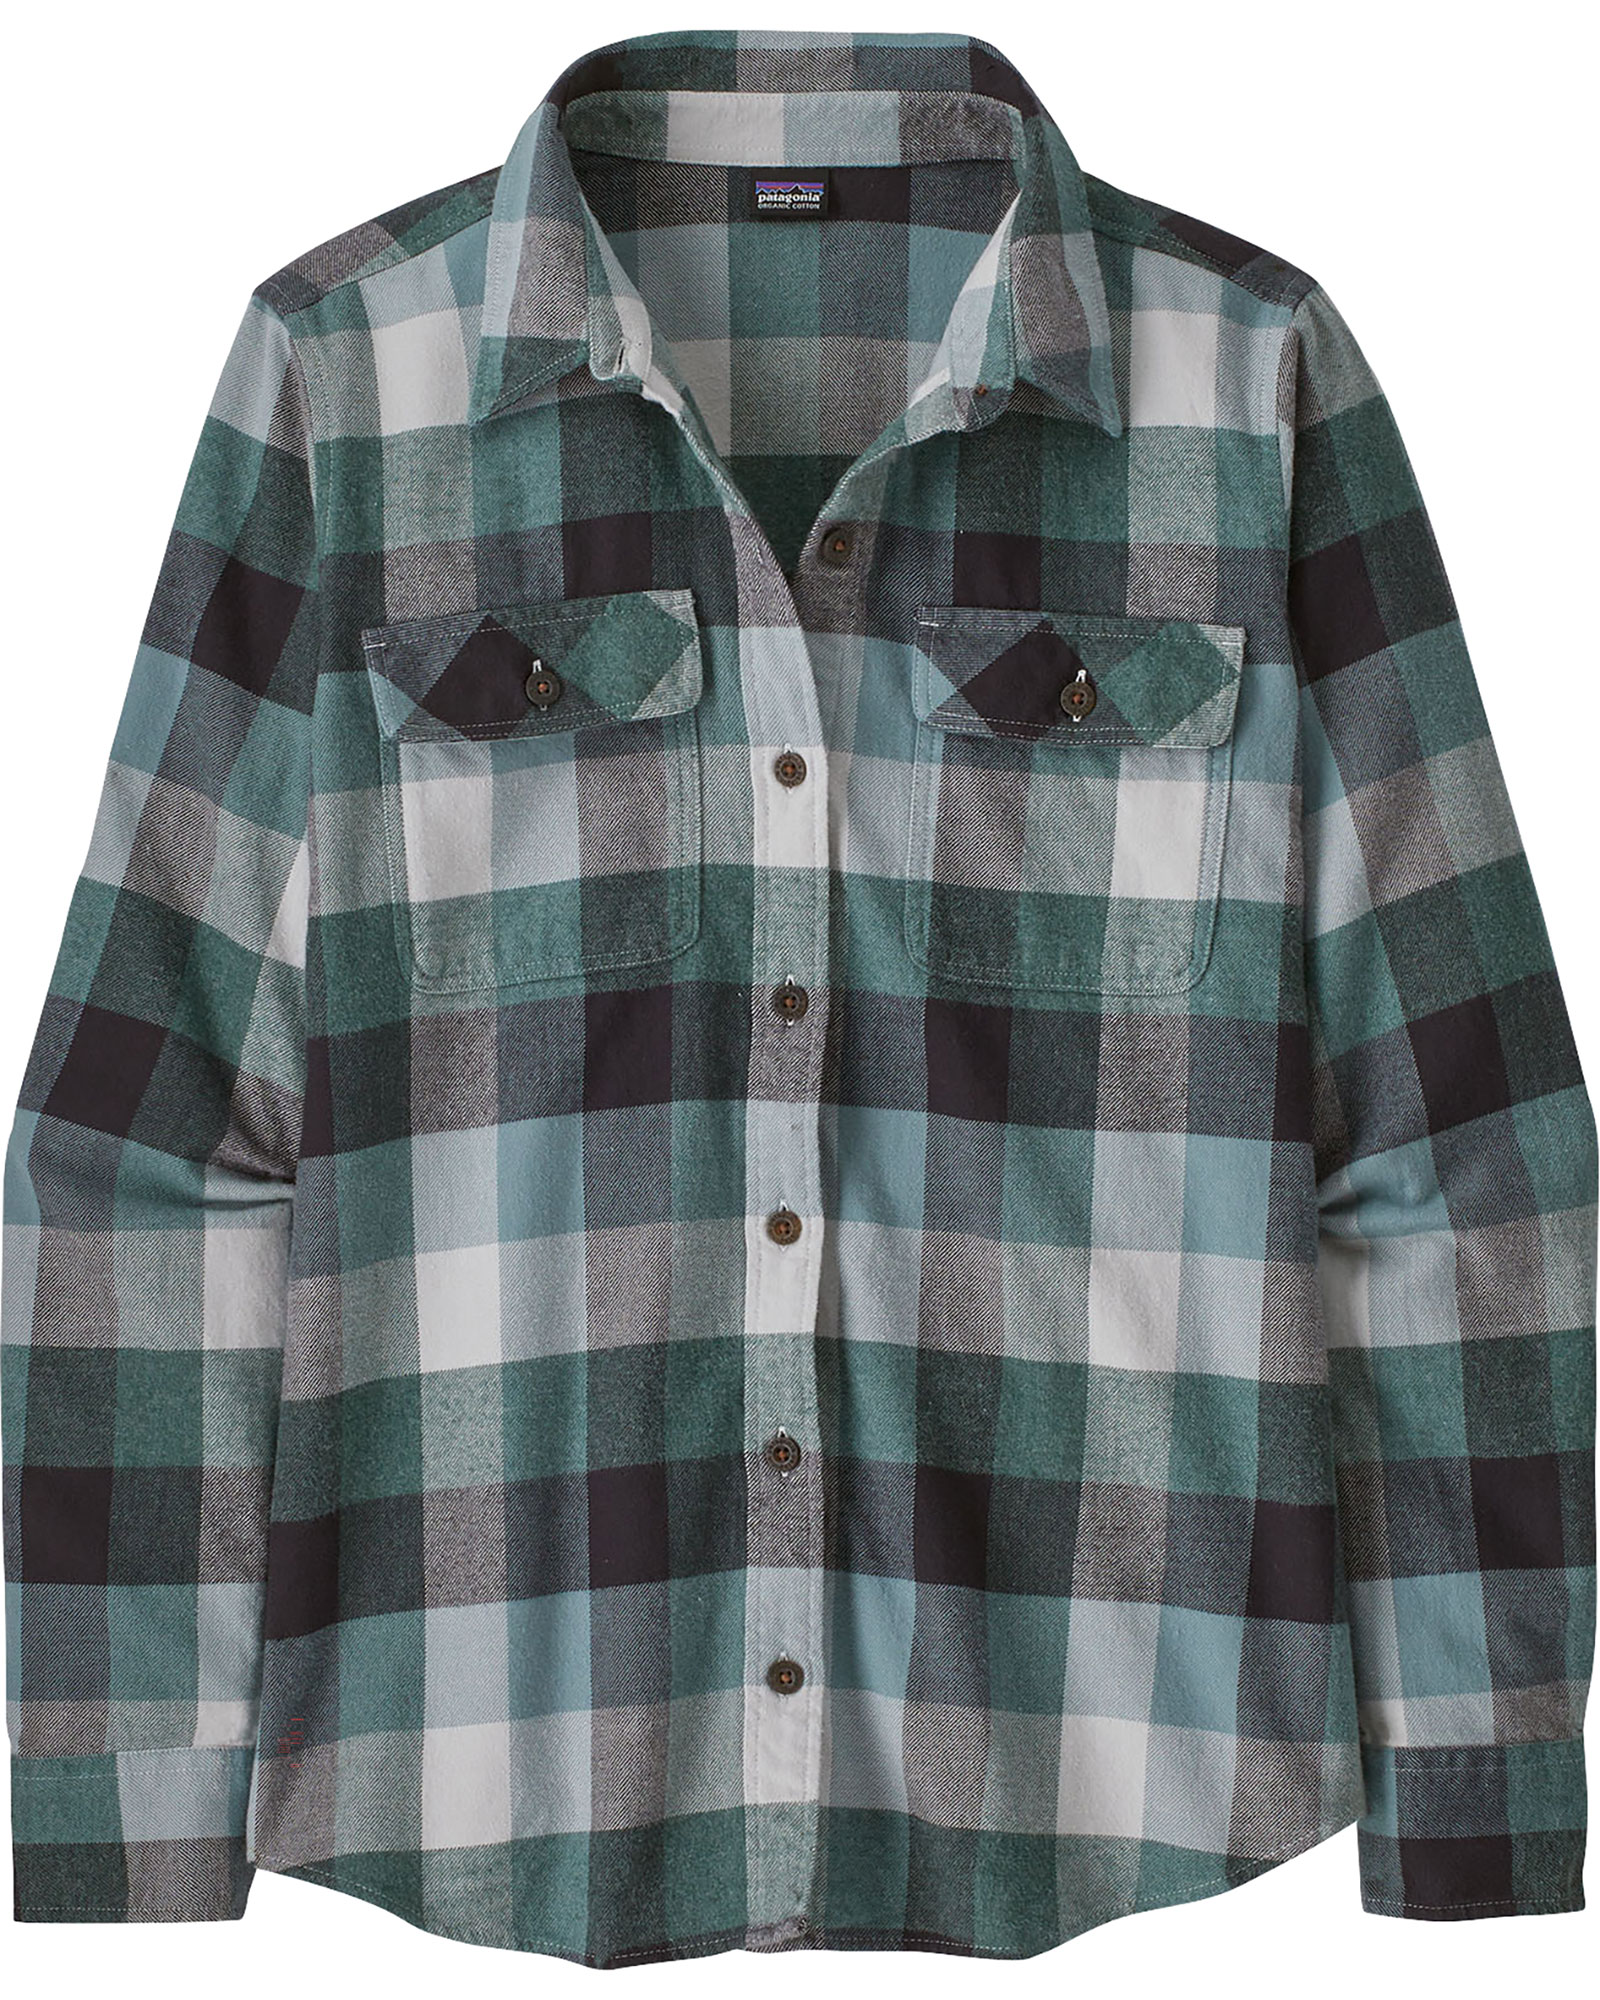 Patagonia Women’s Organic Cotton MW Fjord Flannel Long Sleeved Shirt - Guides: Nouveau Green M